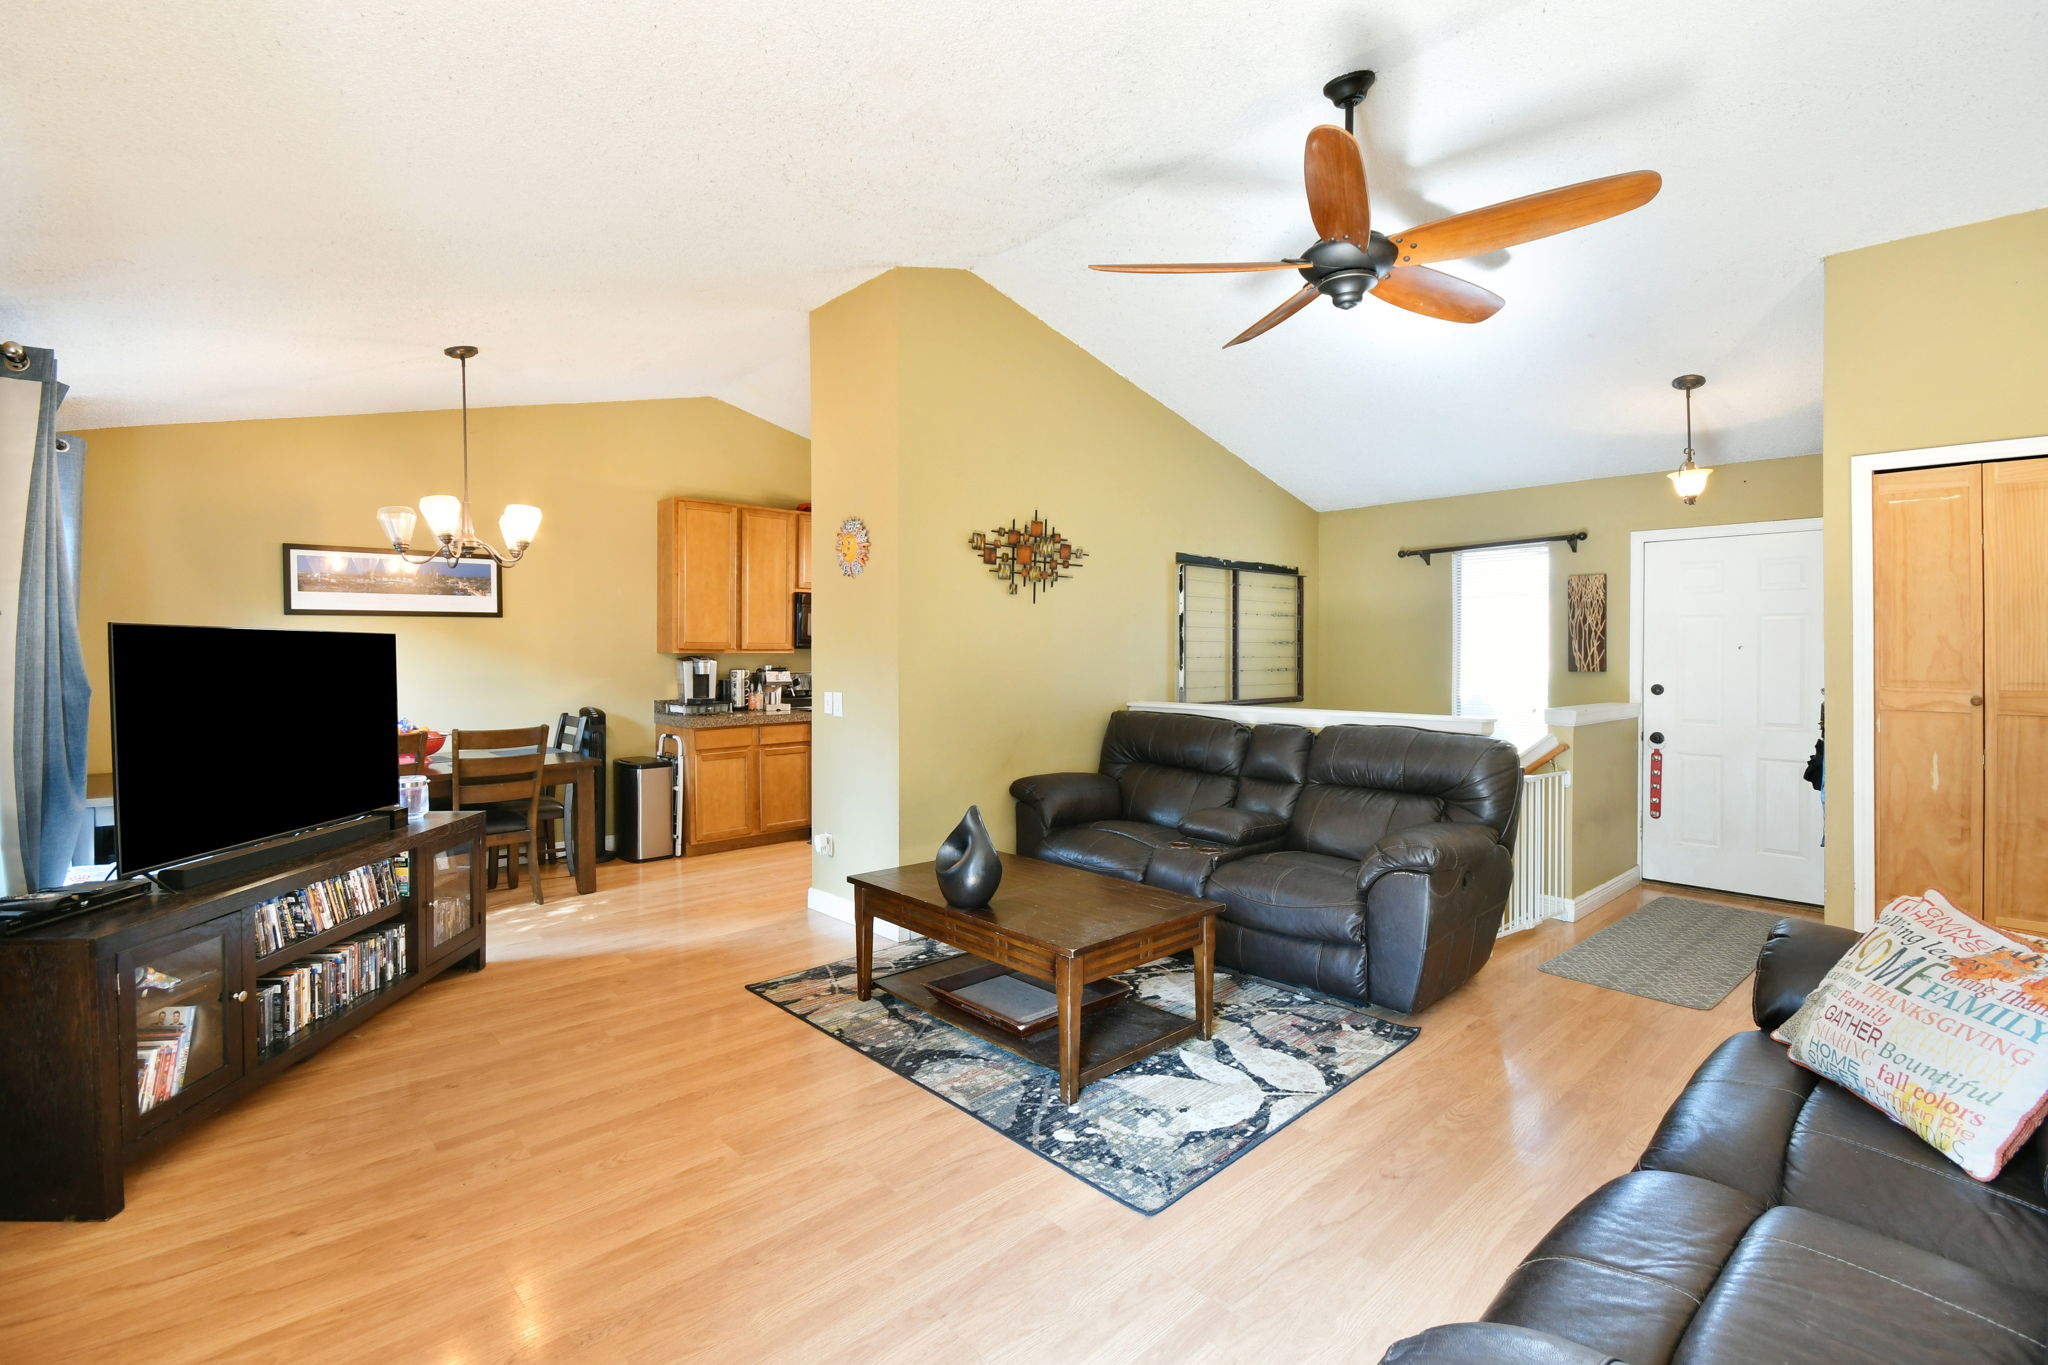  9885 Garland Dr, Westminster, CO 80021, US Photo 3